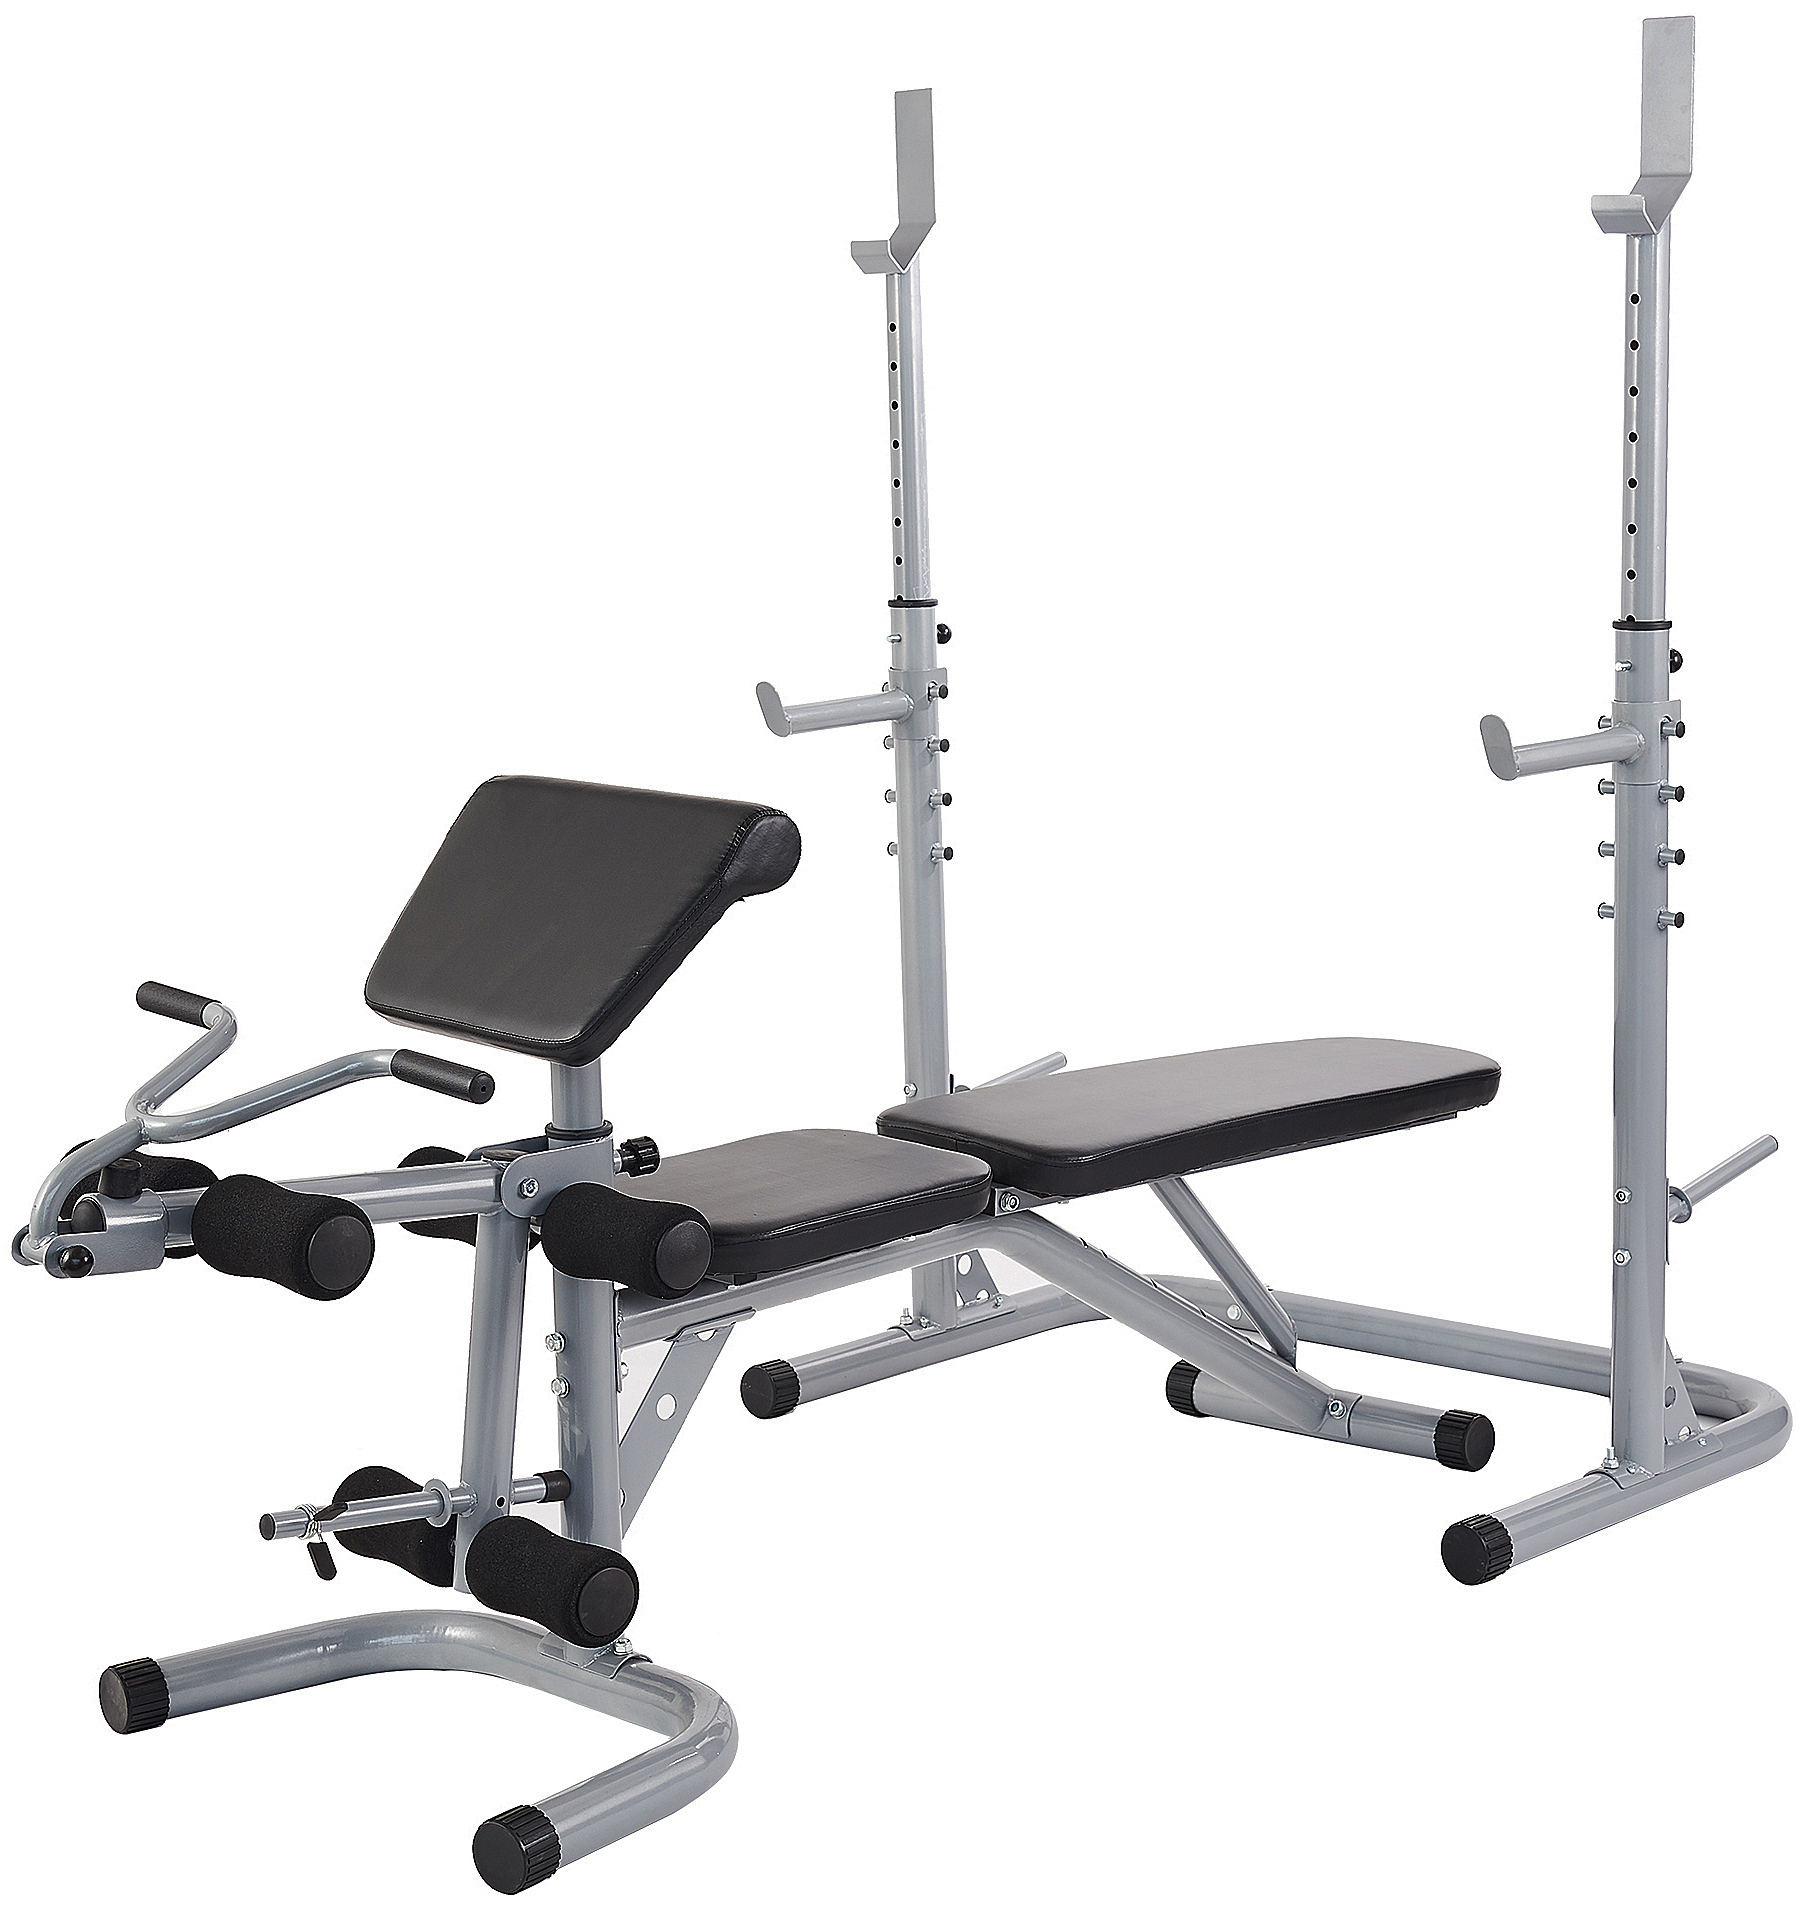 BalanceFromÂ&nbsp;RS 60 Multifunctional Workout StationÂ&nbsp;Adjustable Olympic Workout Bench with Squat Rack,Â&nbsp;Leg Extension, Preacher Curl, and Weight Storage, 800-Pound Capacity - image 3 of 6